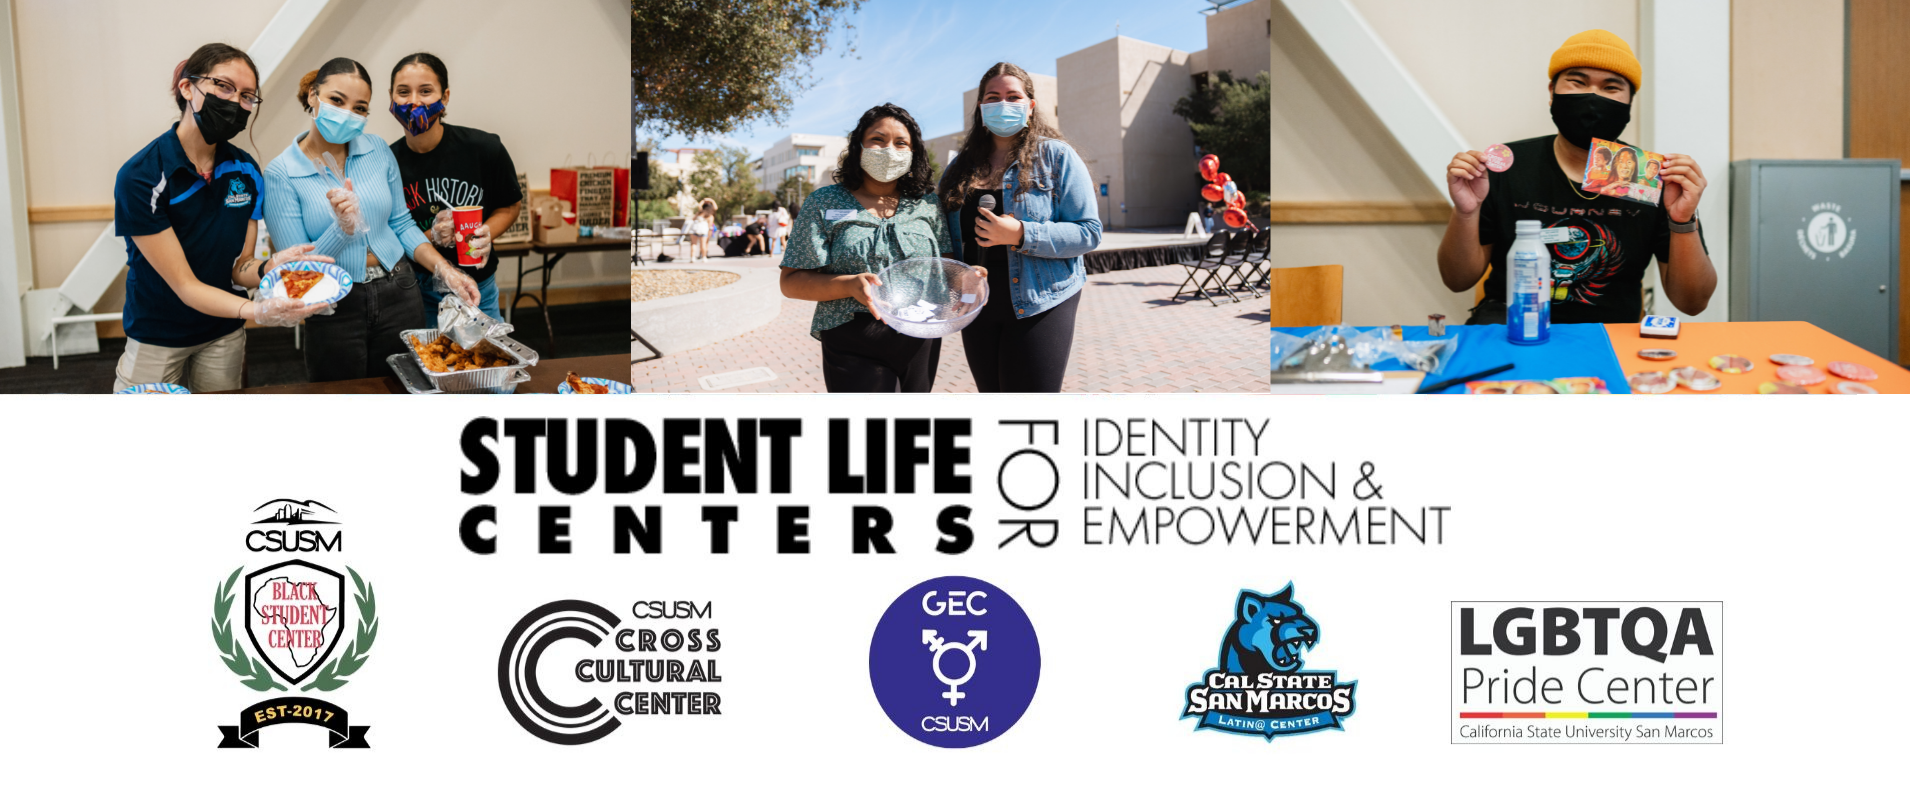 Student Life Centers for Identity Inclusion & Empowerment - logos for: Black Student Center, Cross Cultural Center, GEC, Latino Center, and LGBTQA Pride Center